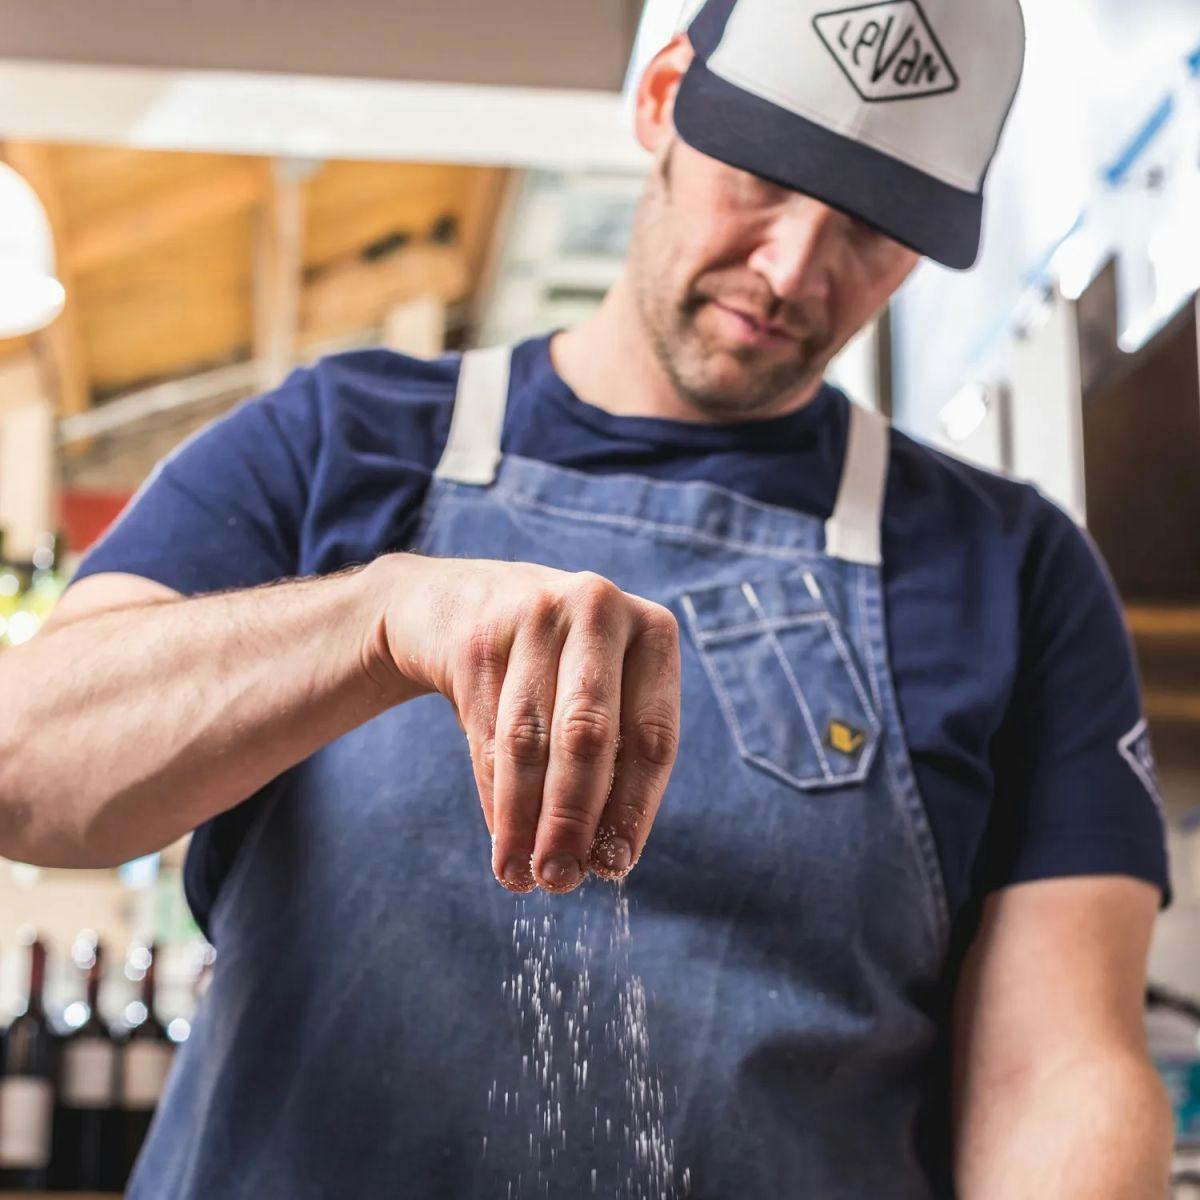 Chef sprinkling salt and wearing a hat that says "Leven"